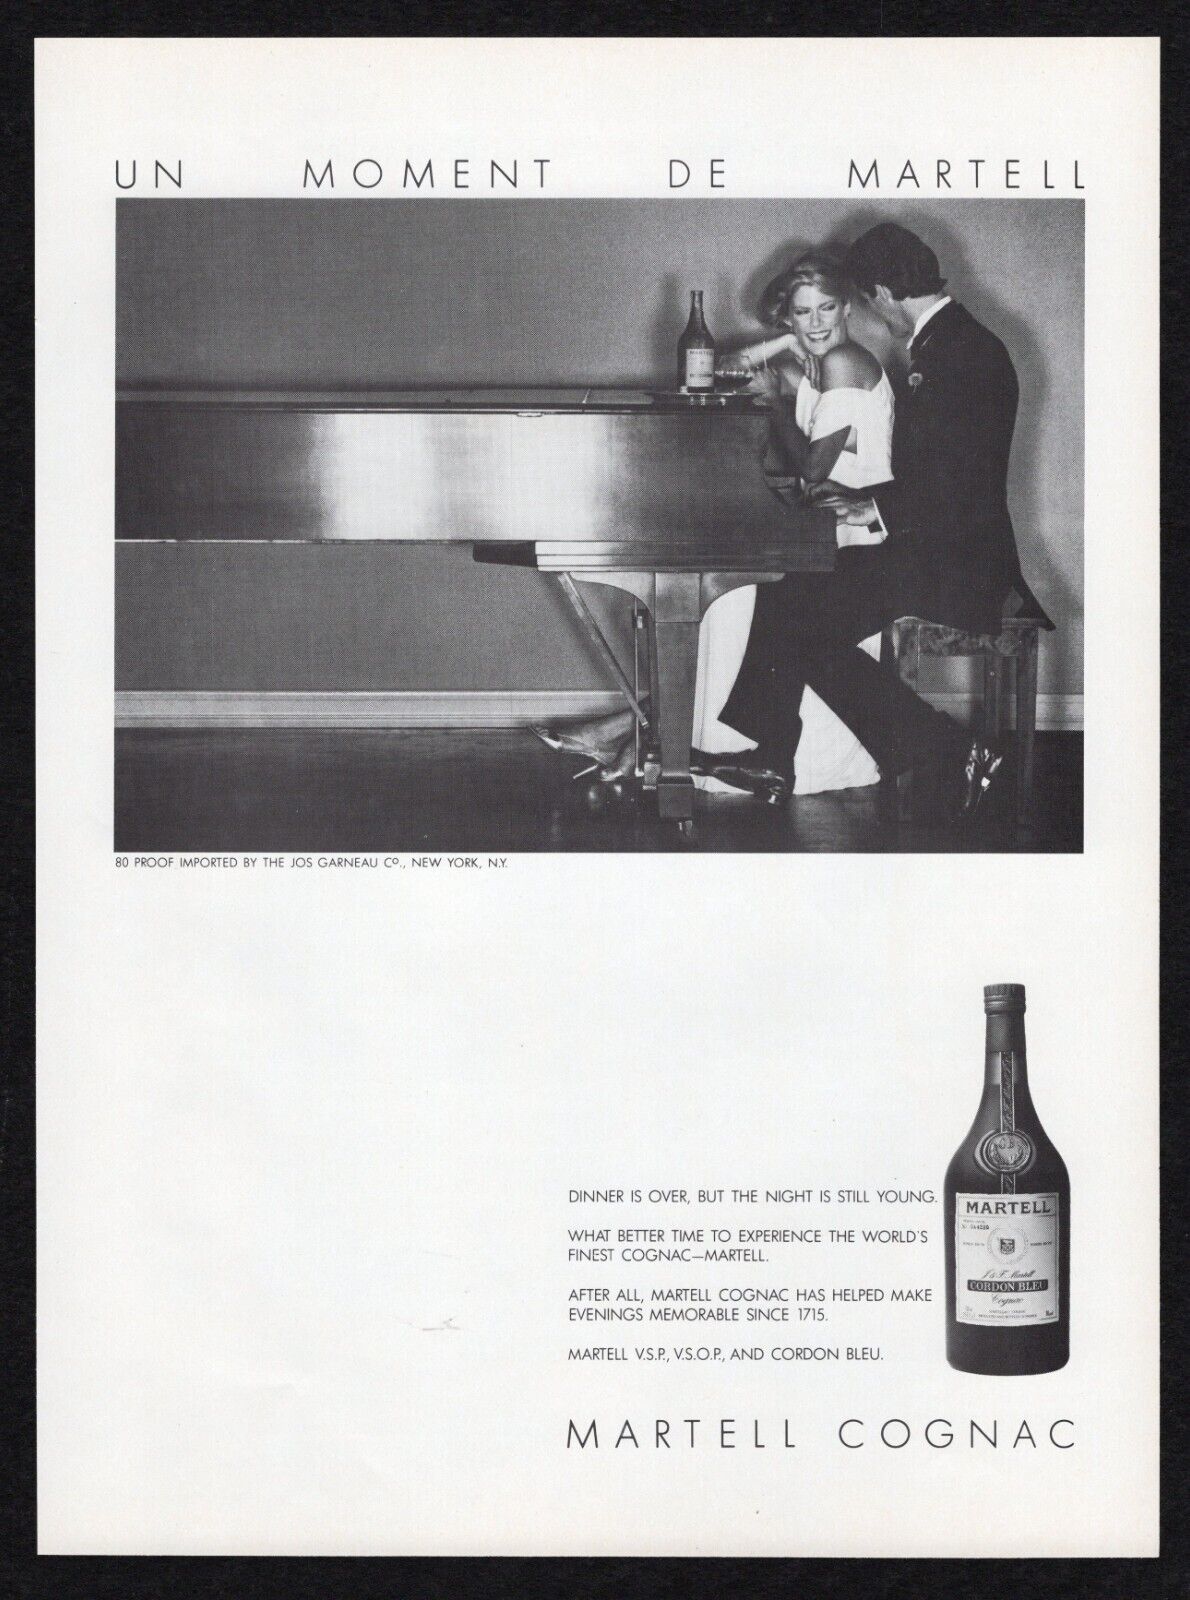 1979 Martell Cognac Cordon Bleu Moment Dinner Over Night Young Piano Print Ad